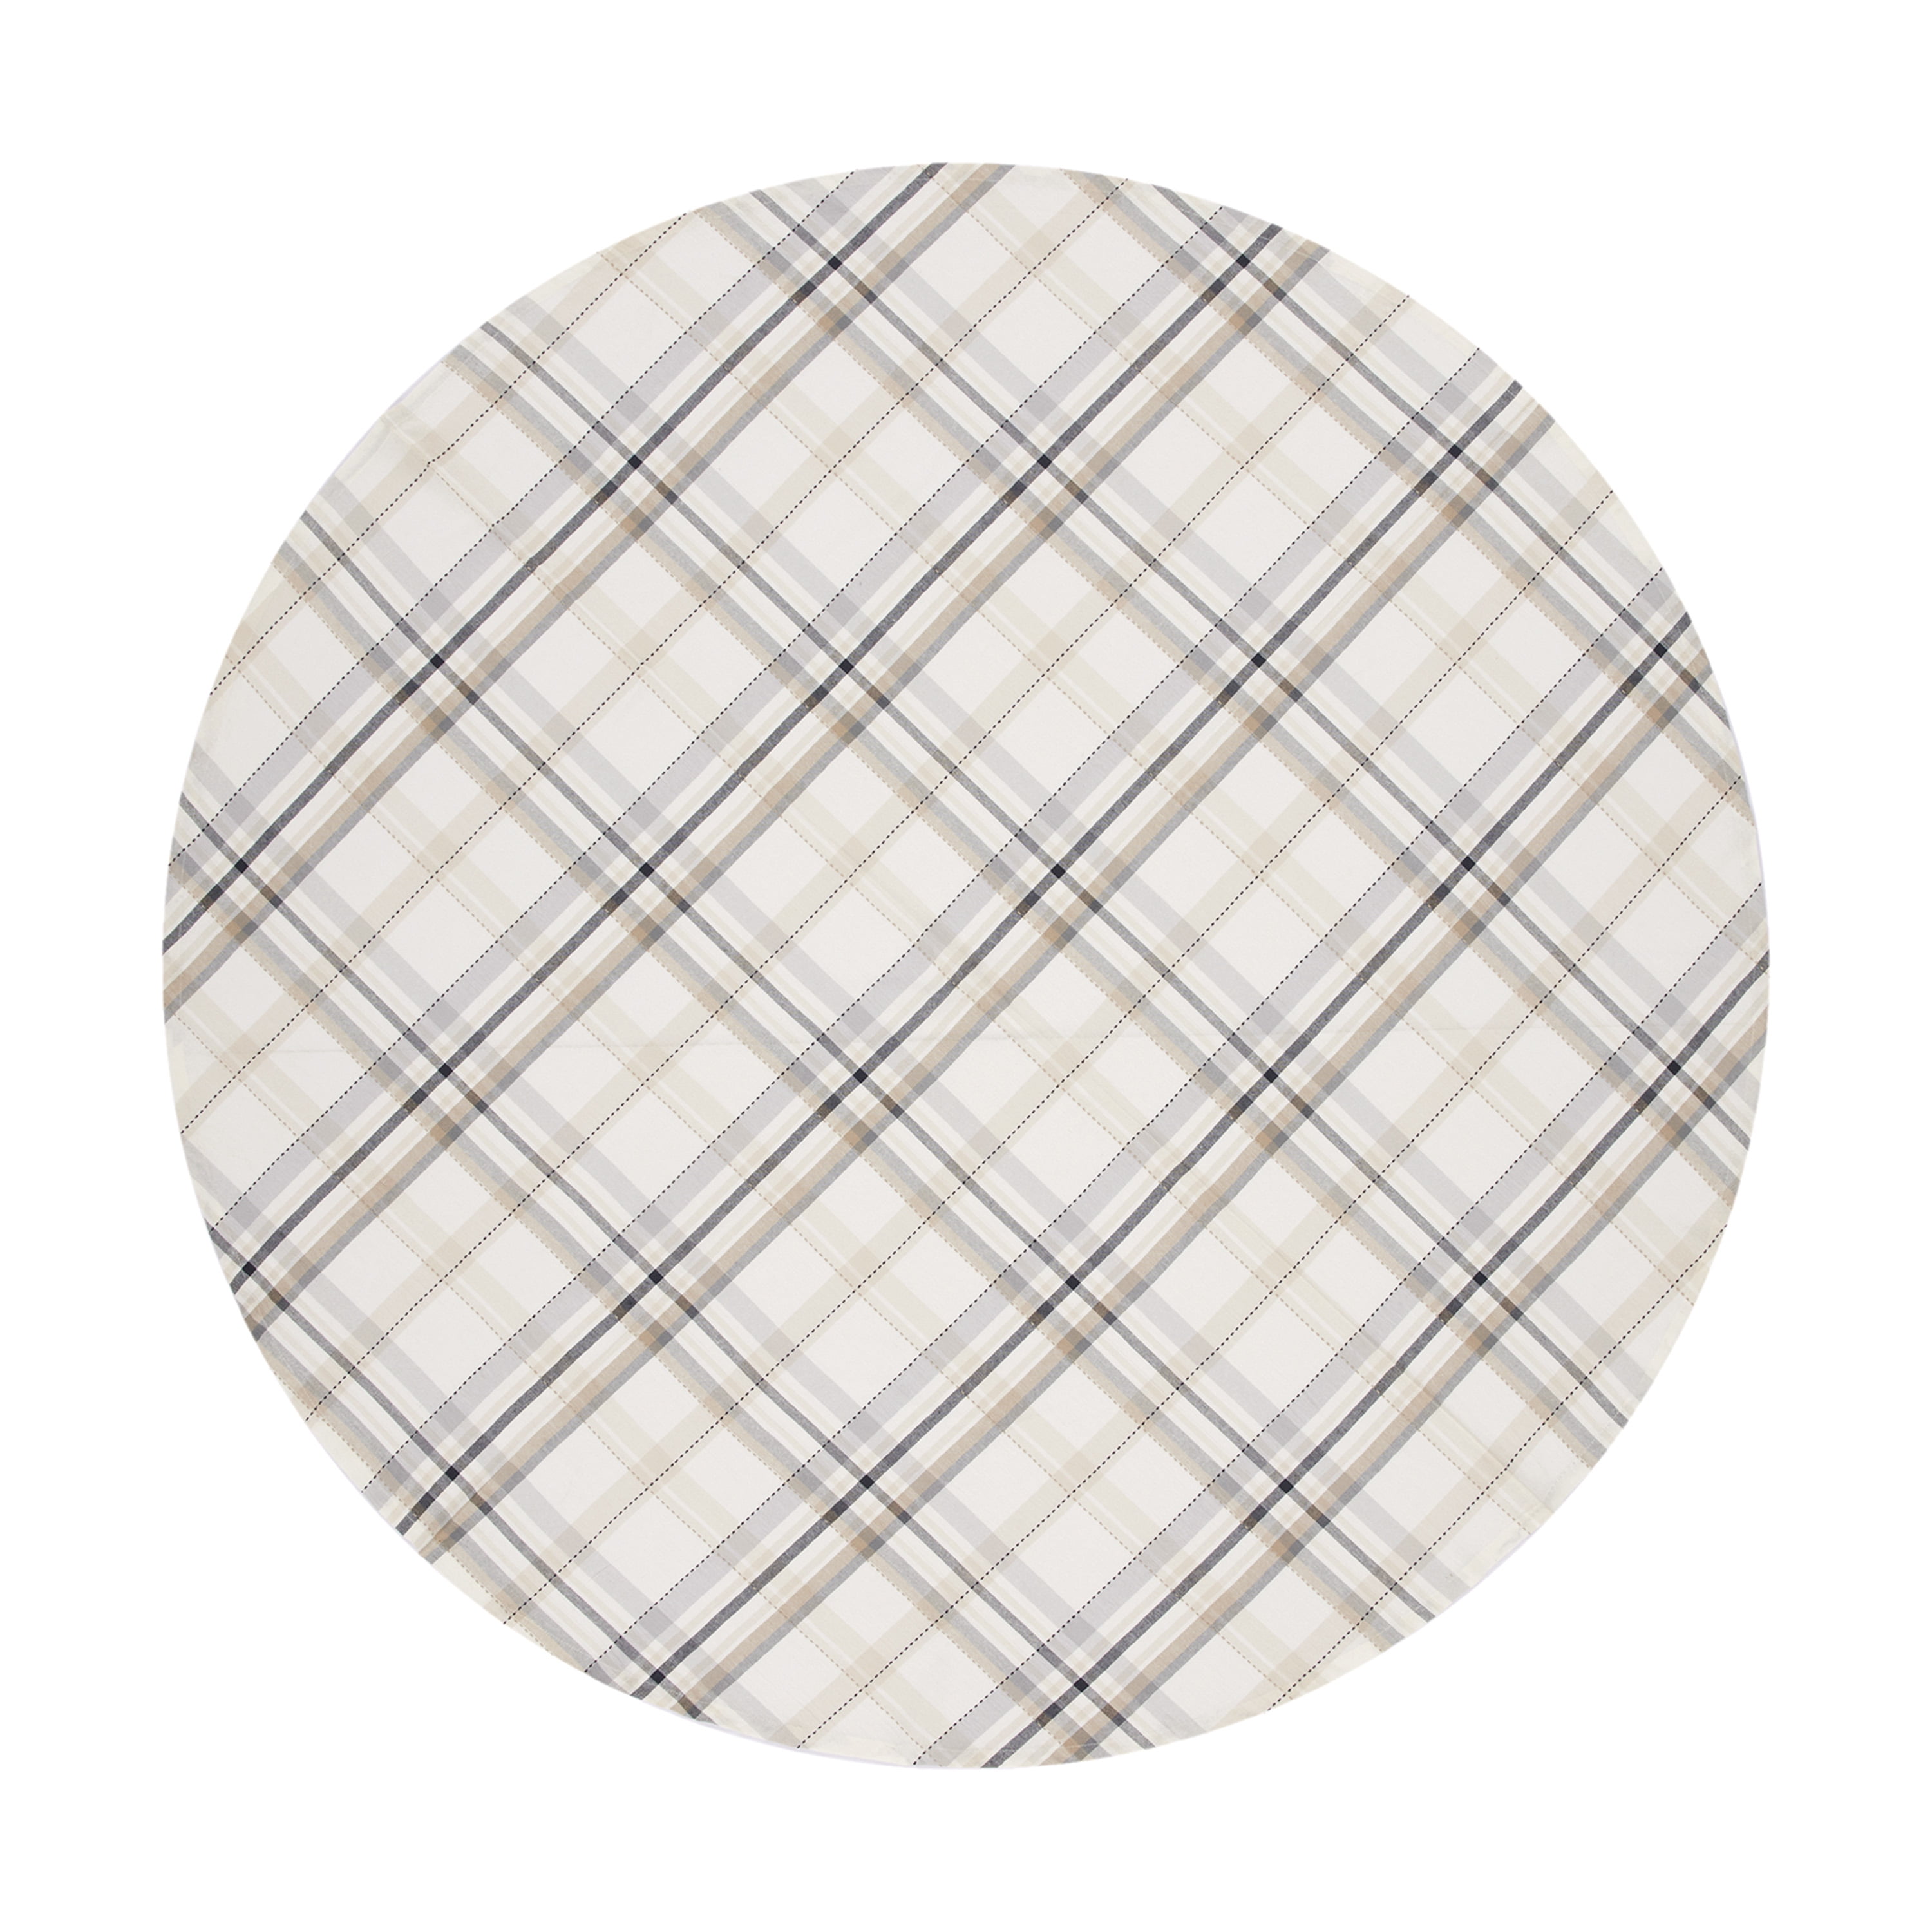 Better Homes and Gardens,  Woven Monday Plaid Table Cloth - Multi Color - 70" - Round